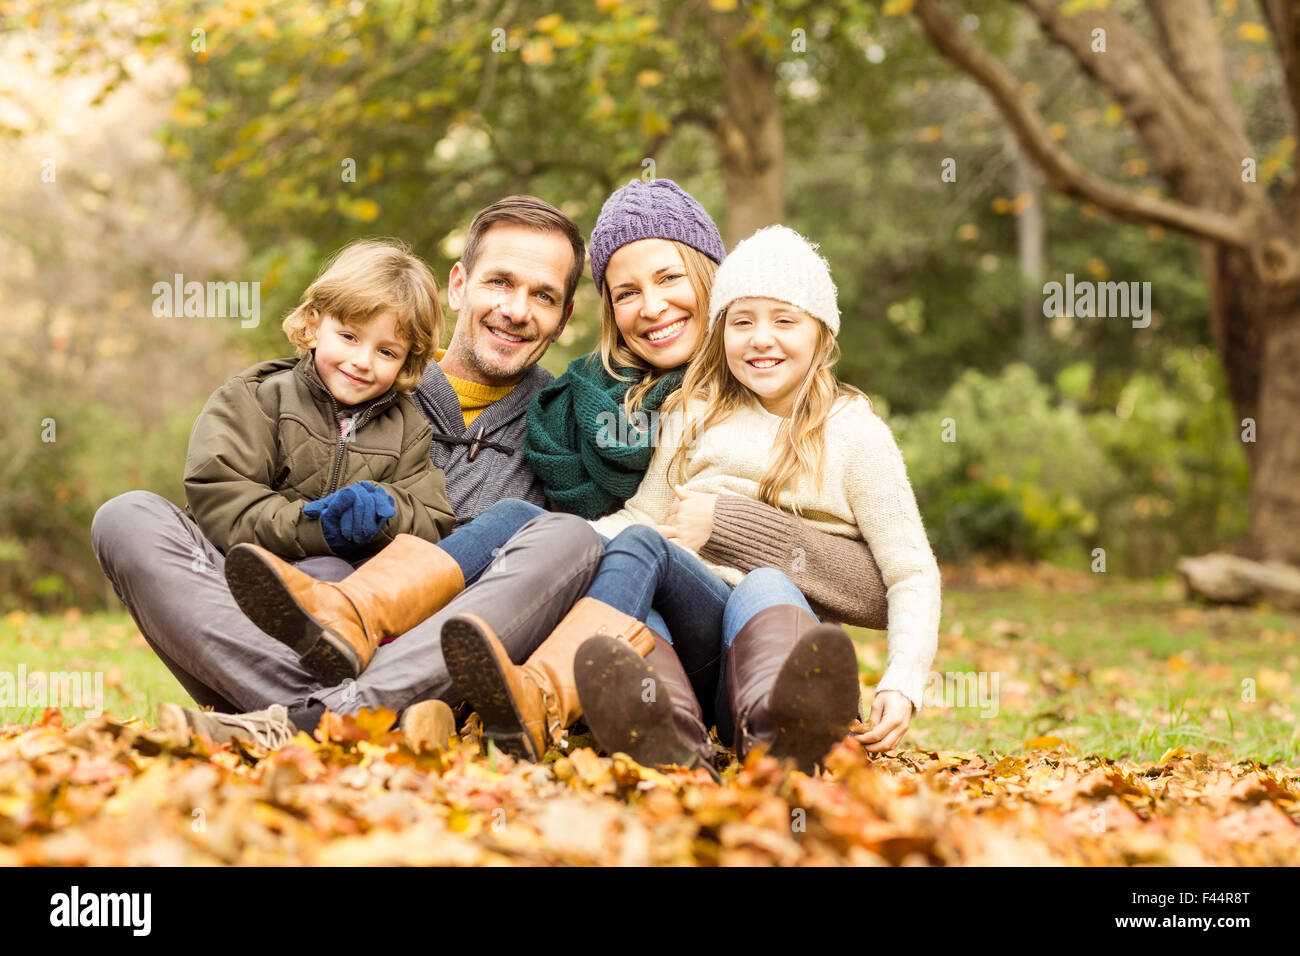 Smiling young family sitting in leaves Stock Photo